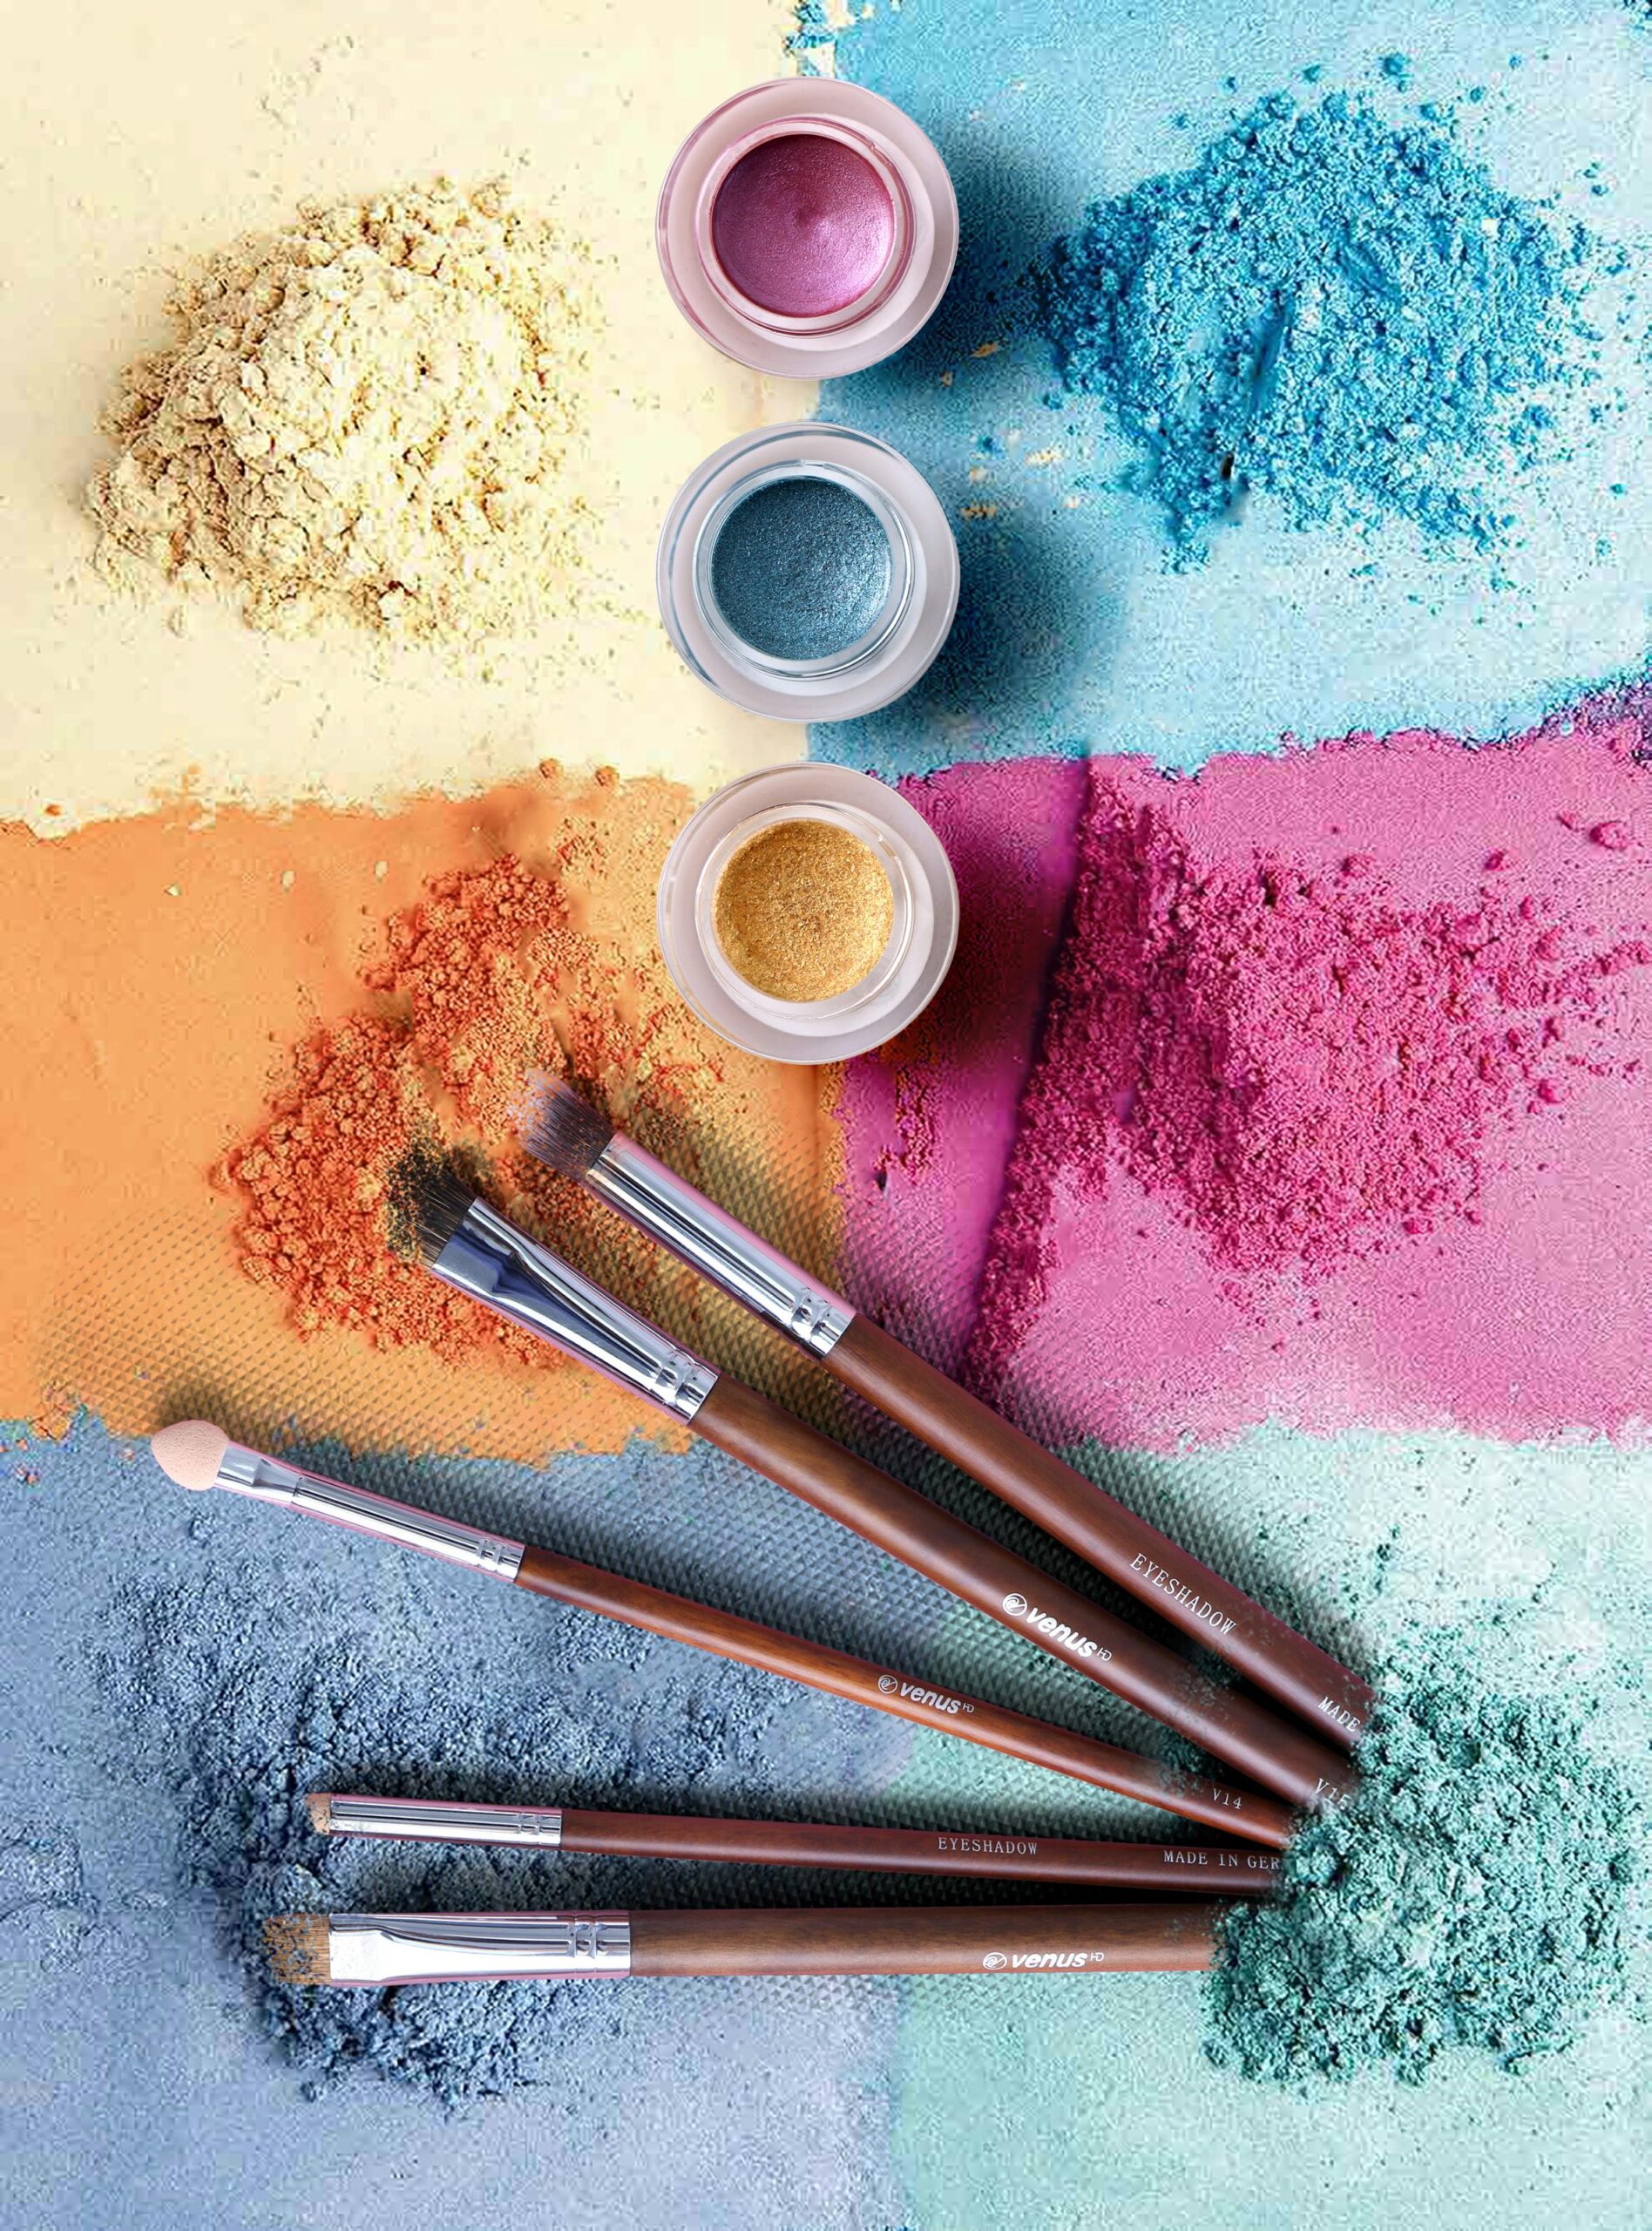 10 Tips For Colourful Eye-catching Makeup Looks For Beginners!